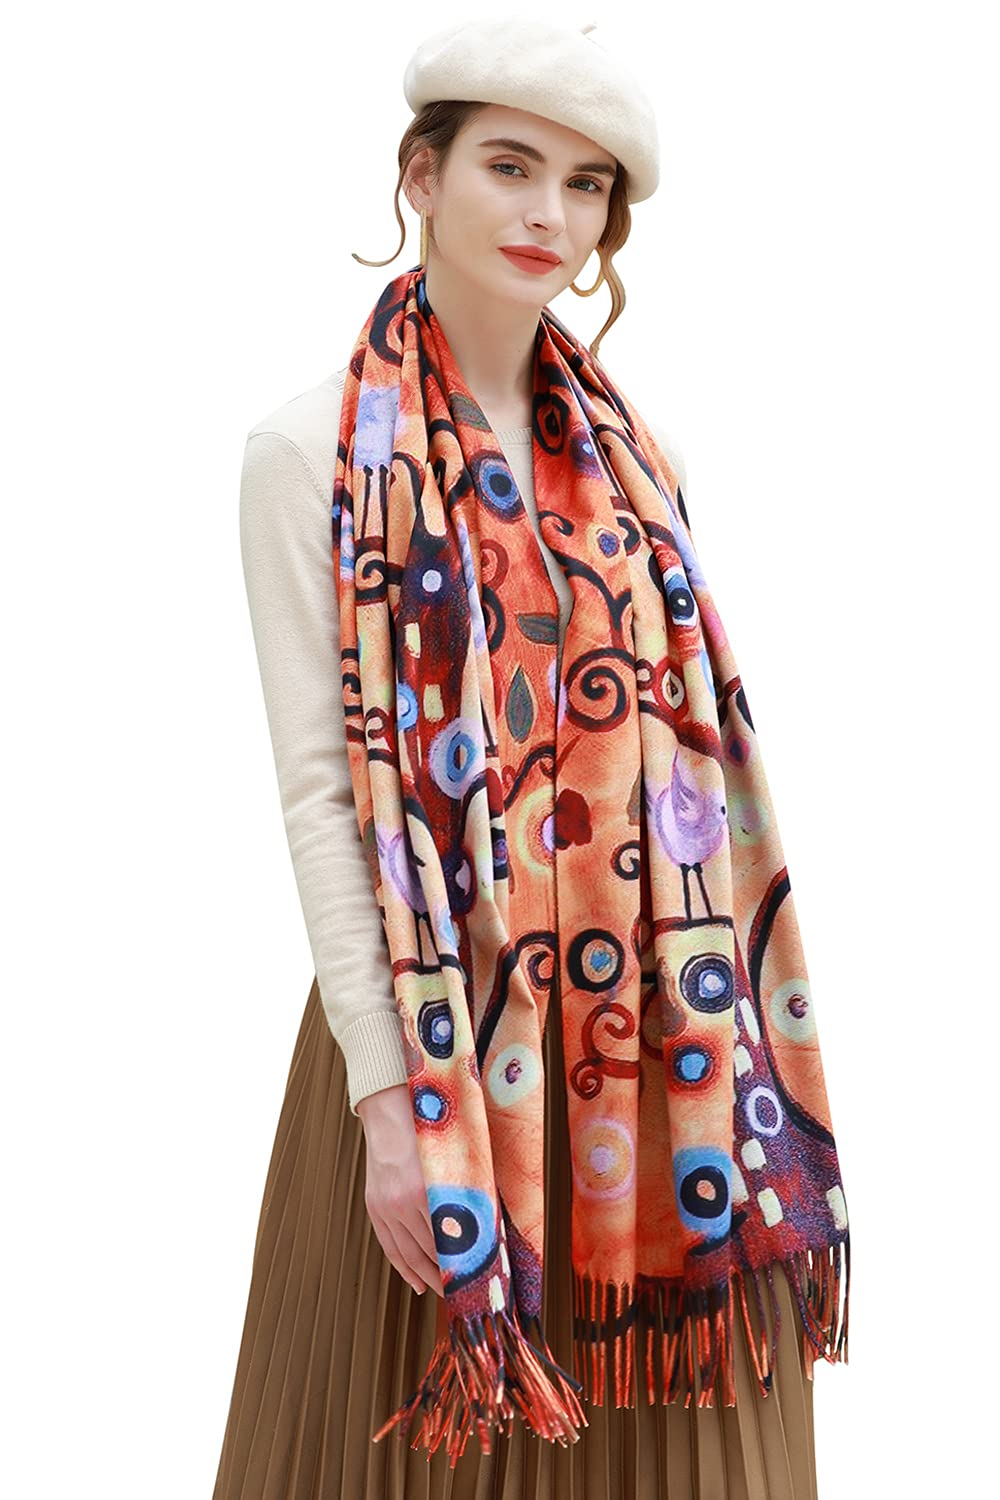 RIIQIICHY Scarfs for Women Pashmina Shawls and Wraps for Evening dresses  Winter Scarves